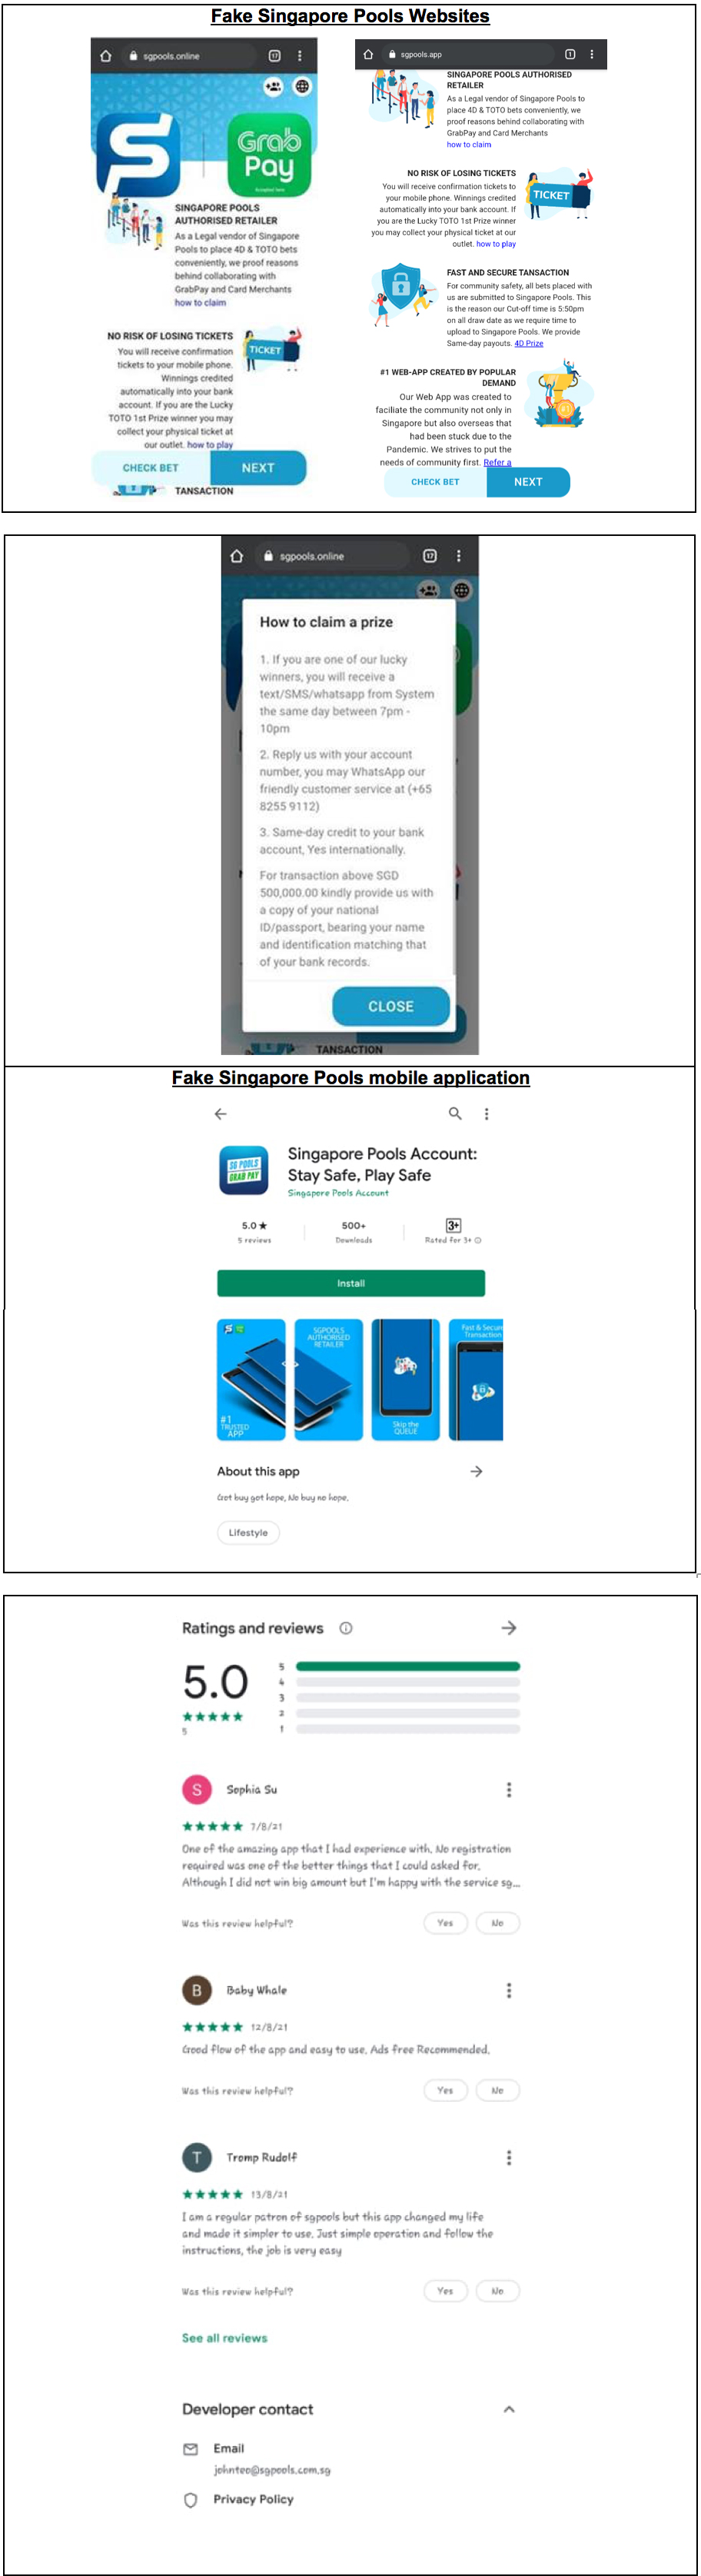 20210825_police_advisory_fake_singapore_pools_websites_and_mobile_applications1.jpg